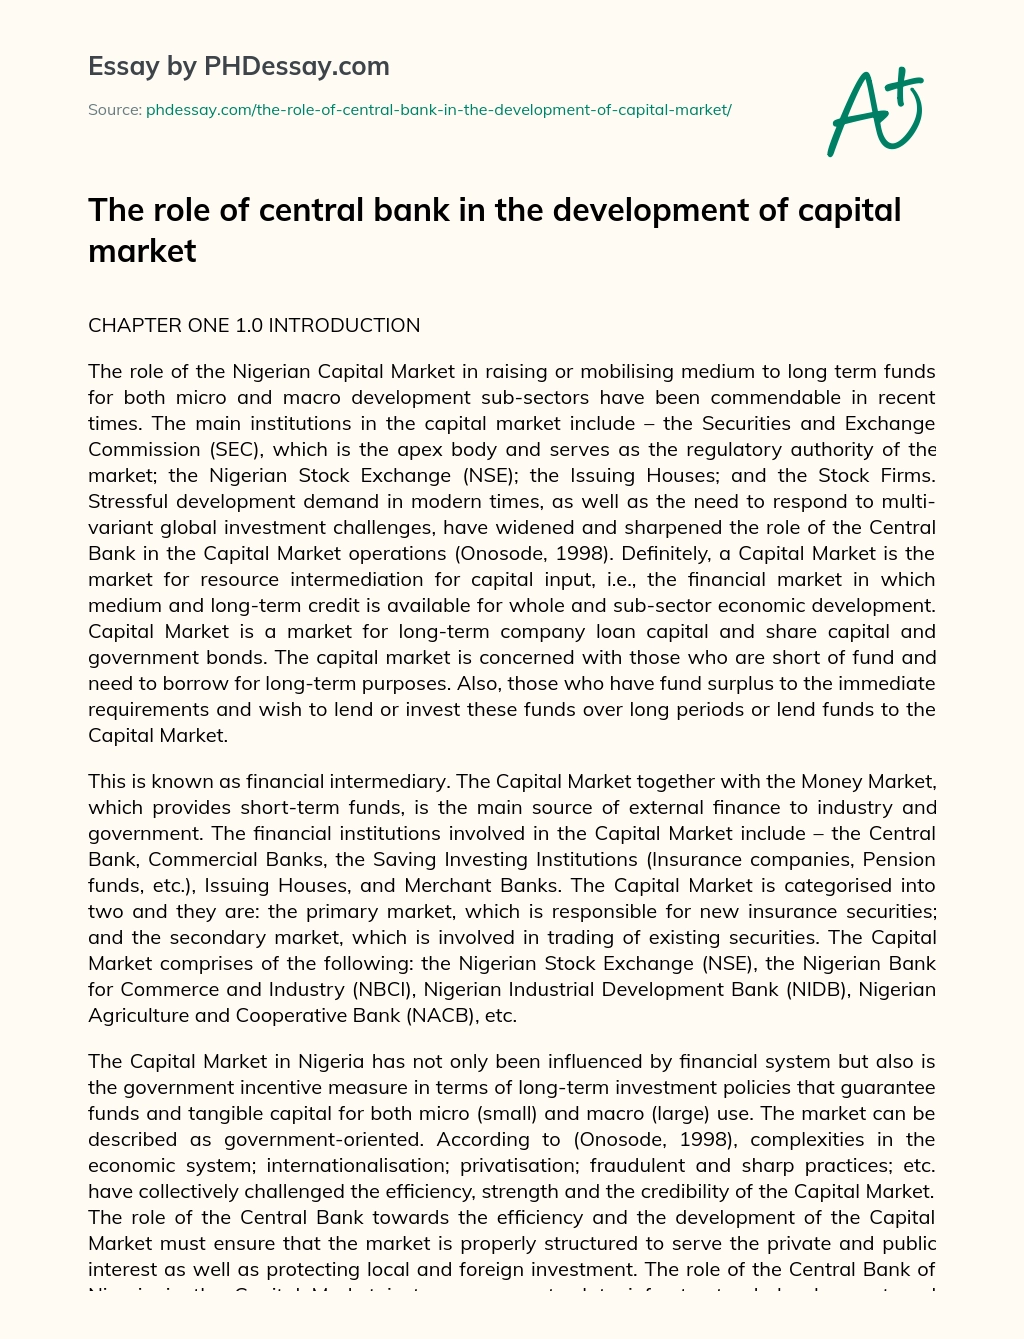 The role of central bank in the development of capital market essay